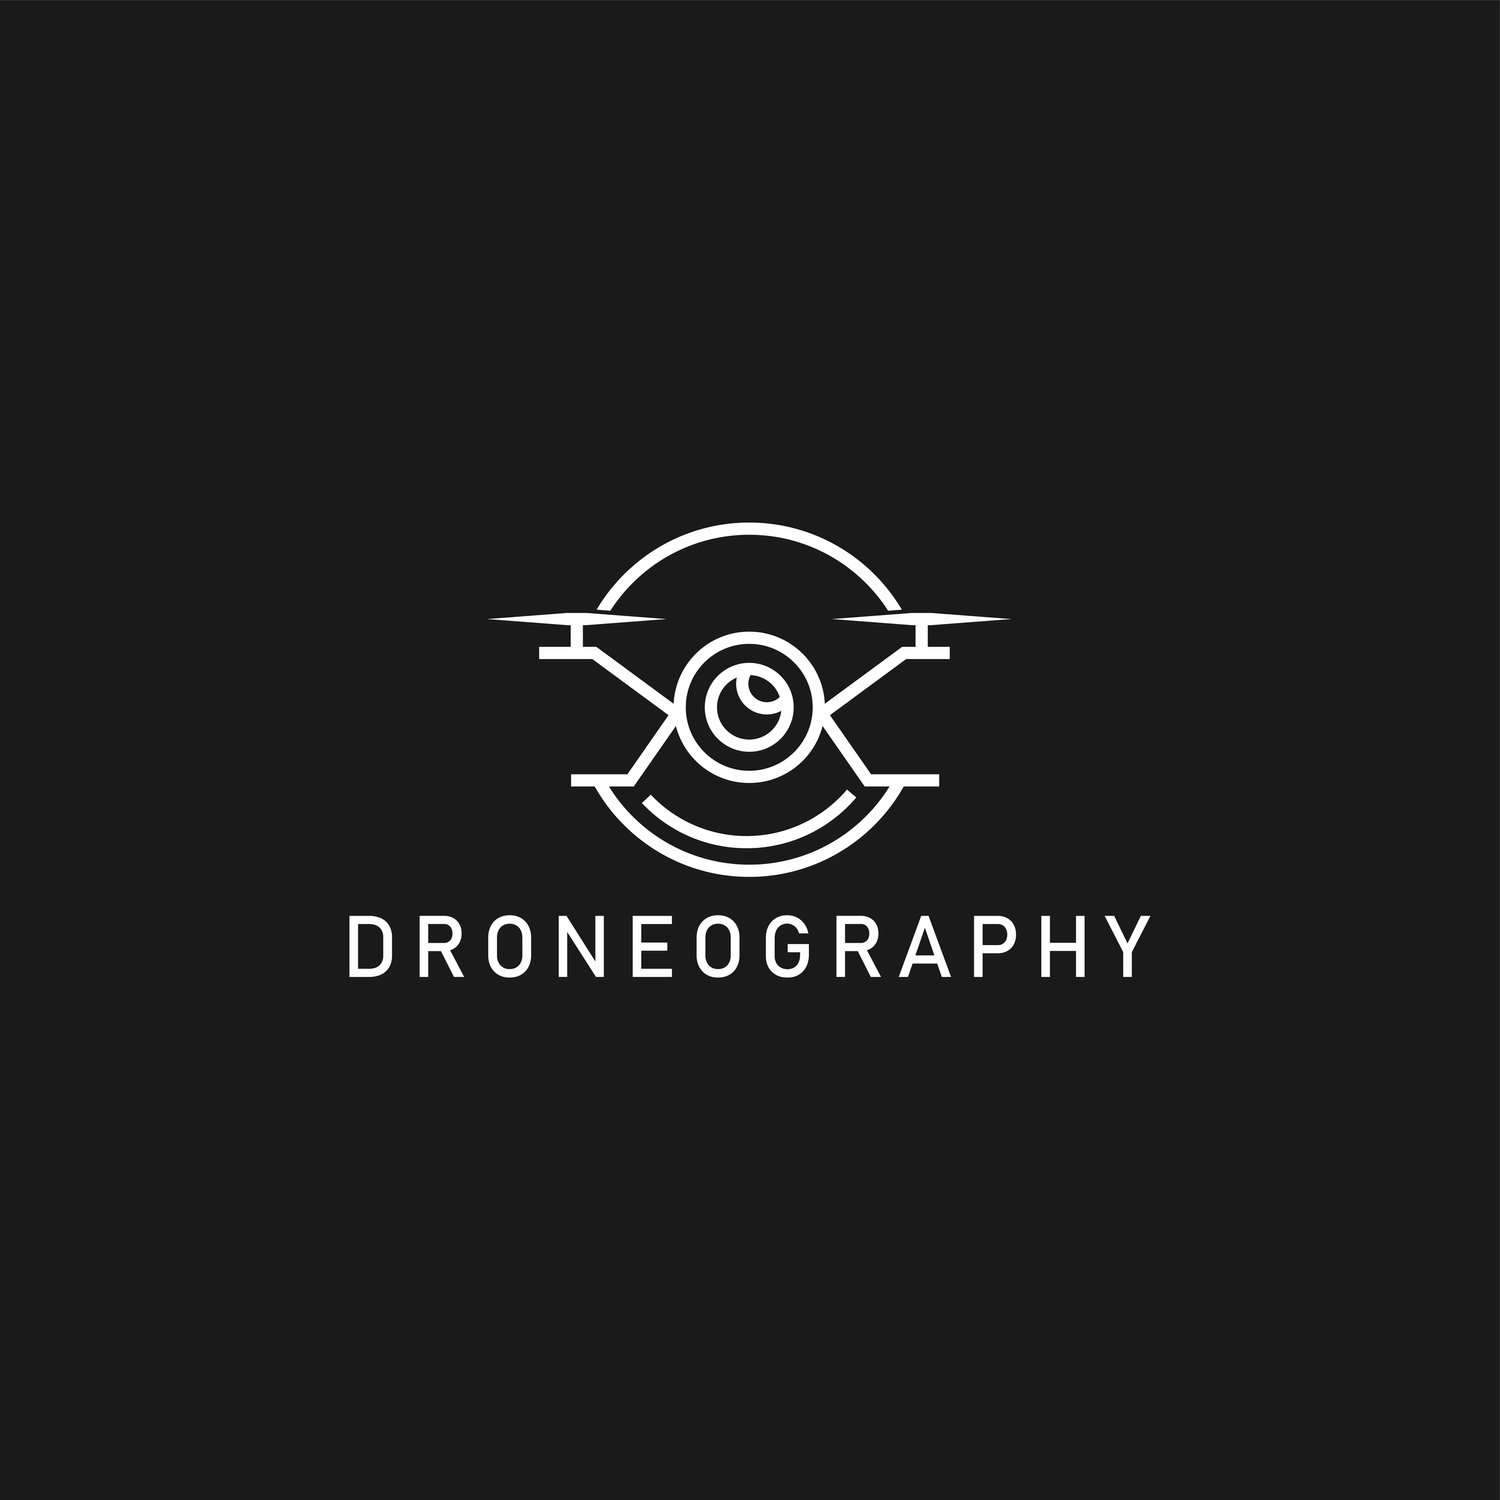 Droneography